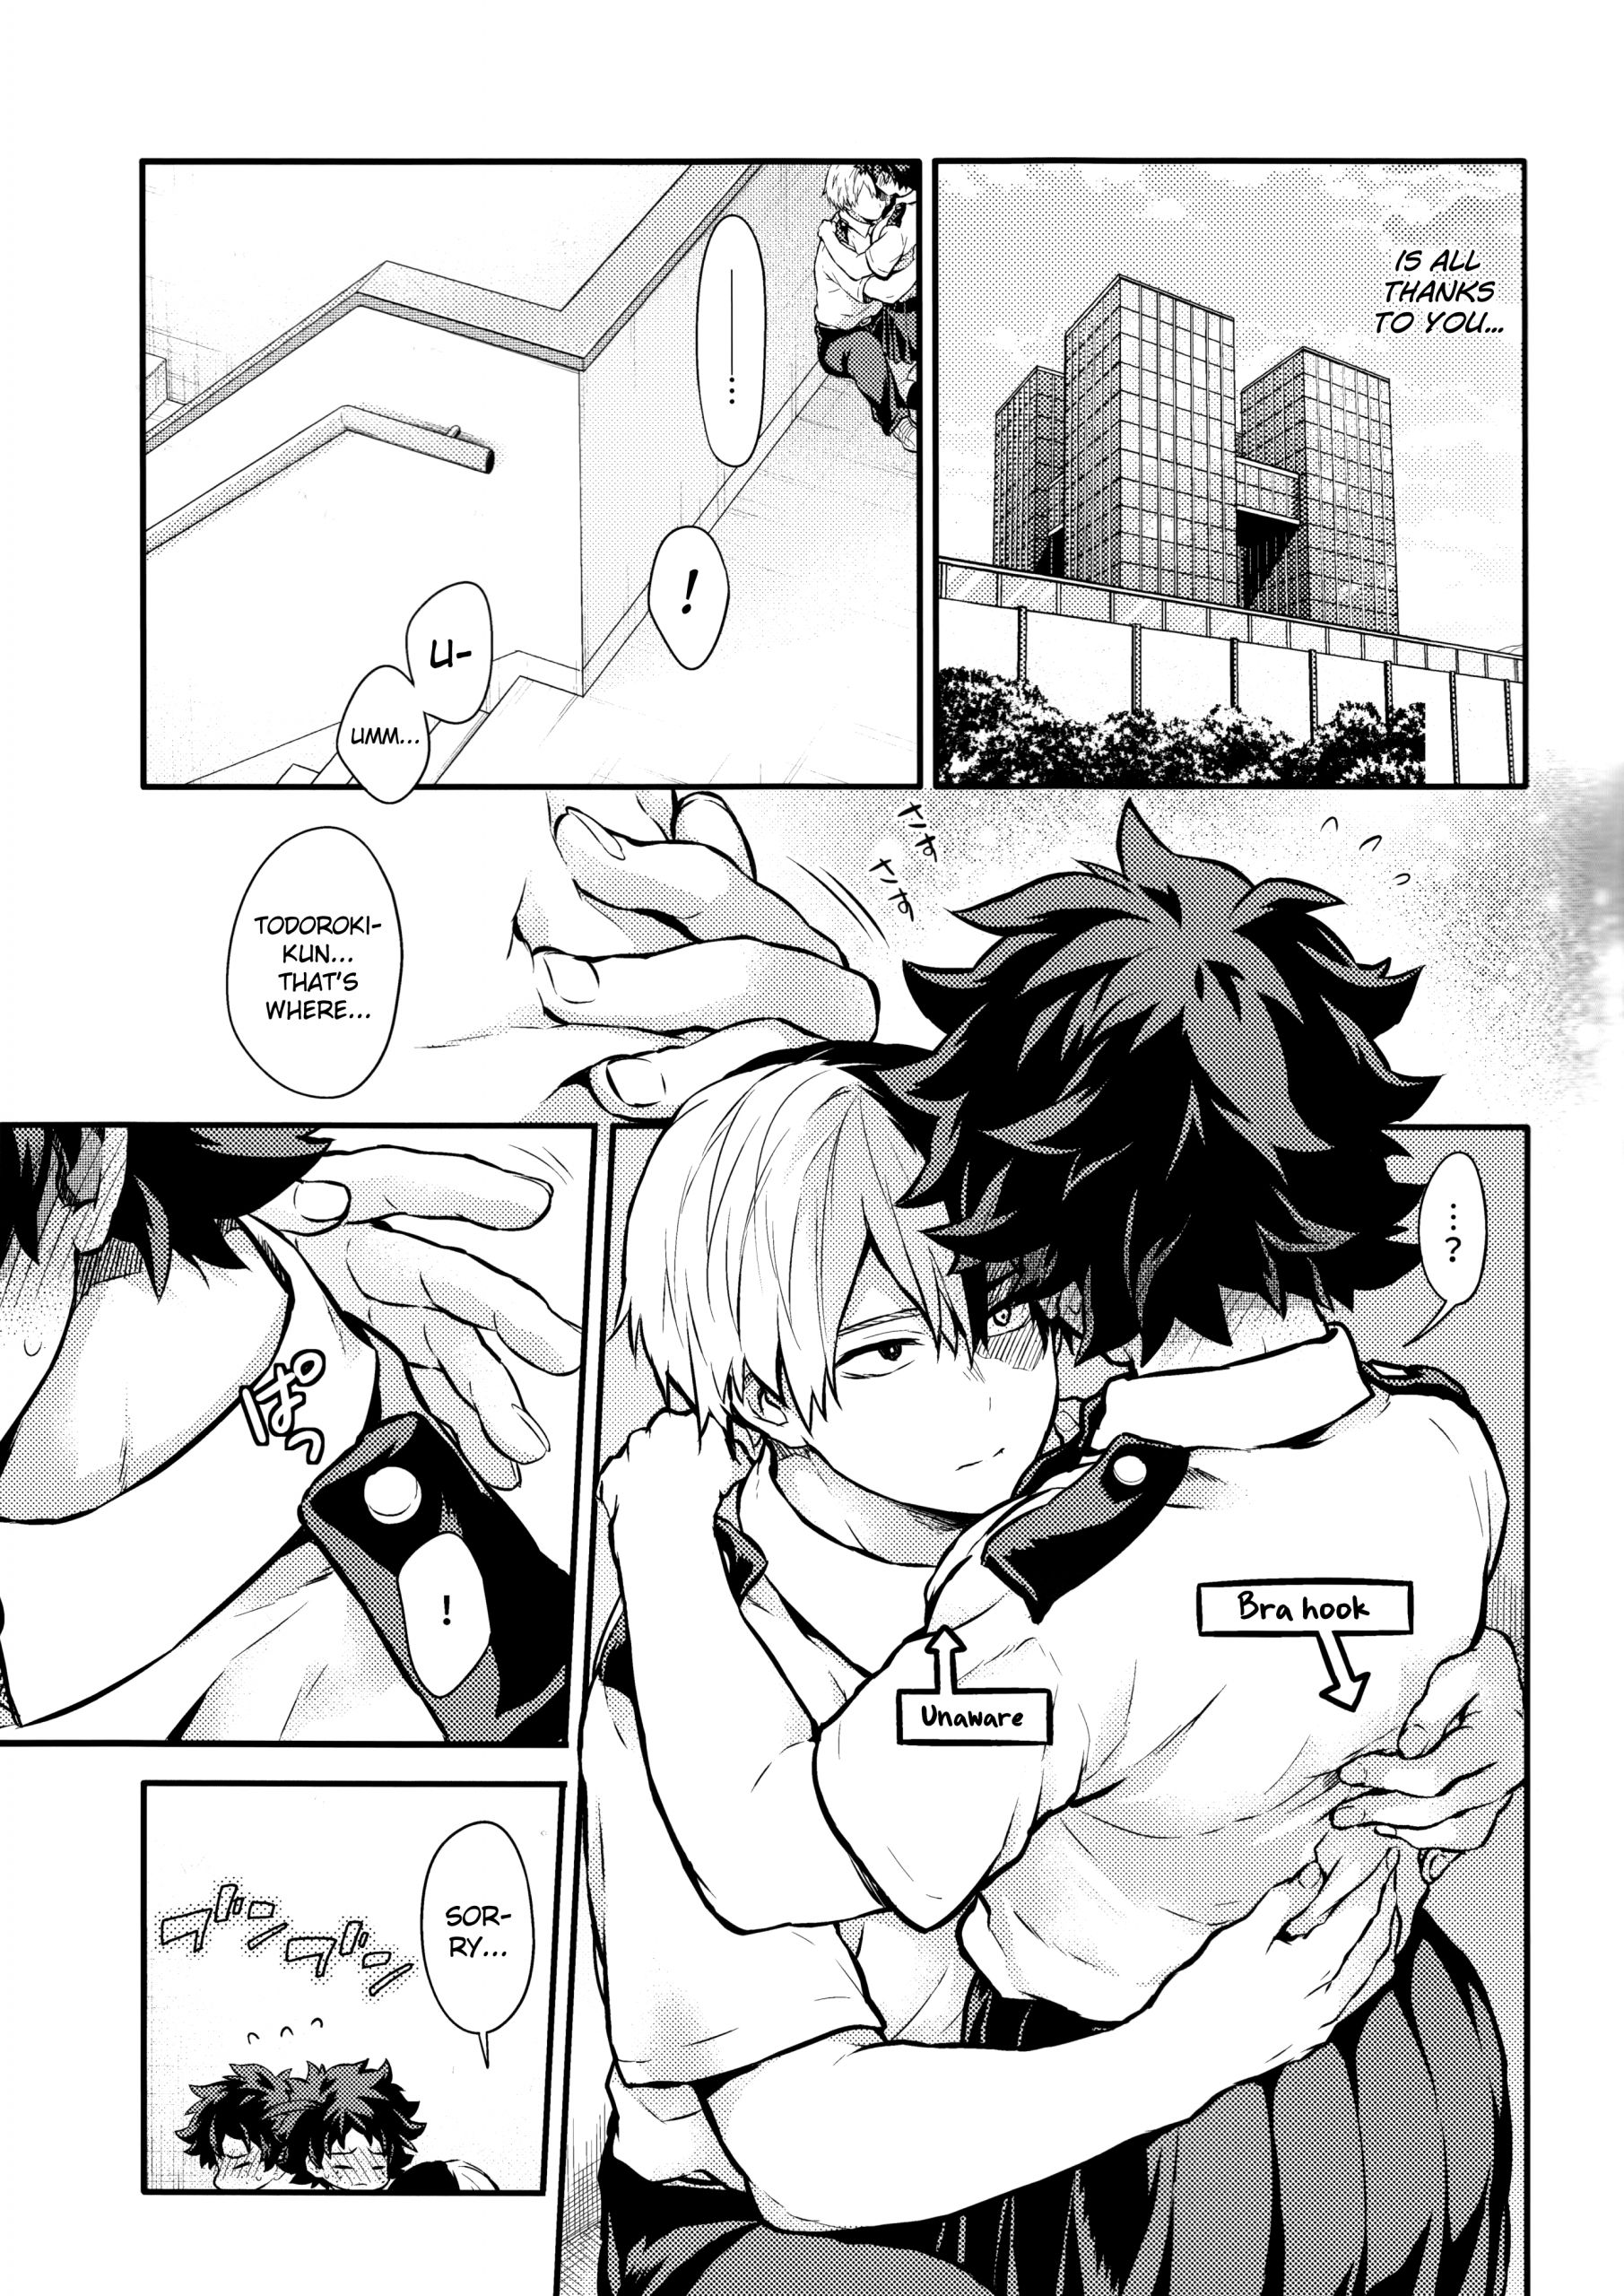 Love me tender another story hentai manga picture 53